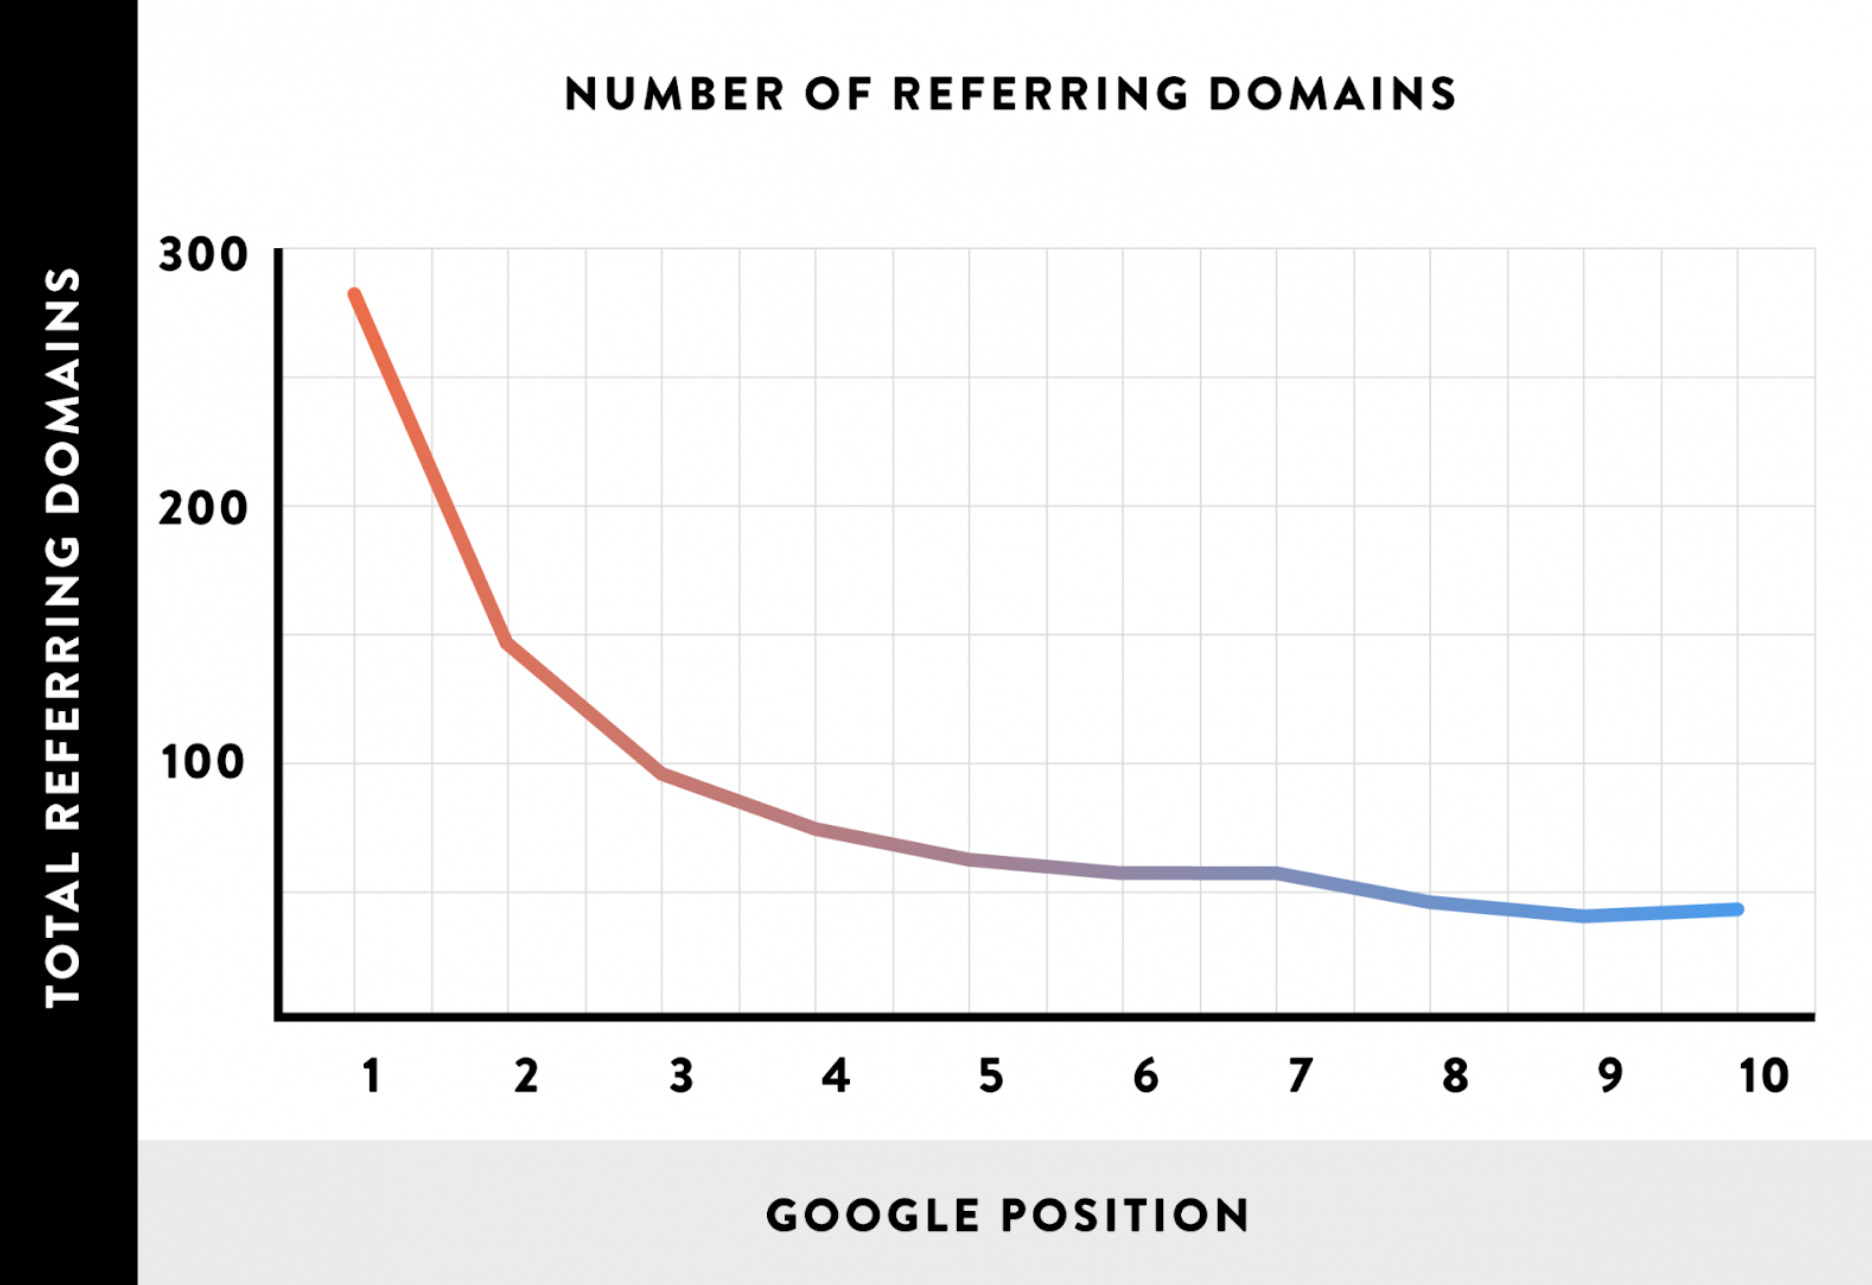 Average Number of Referring Domains it takes to Rank in Google